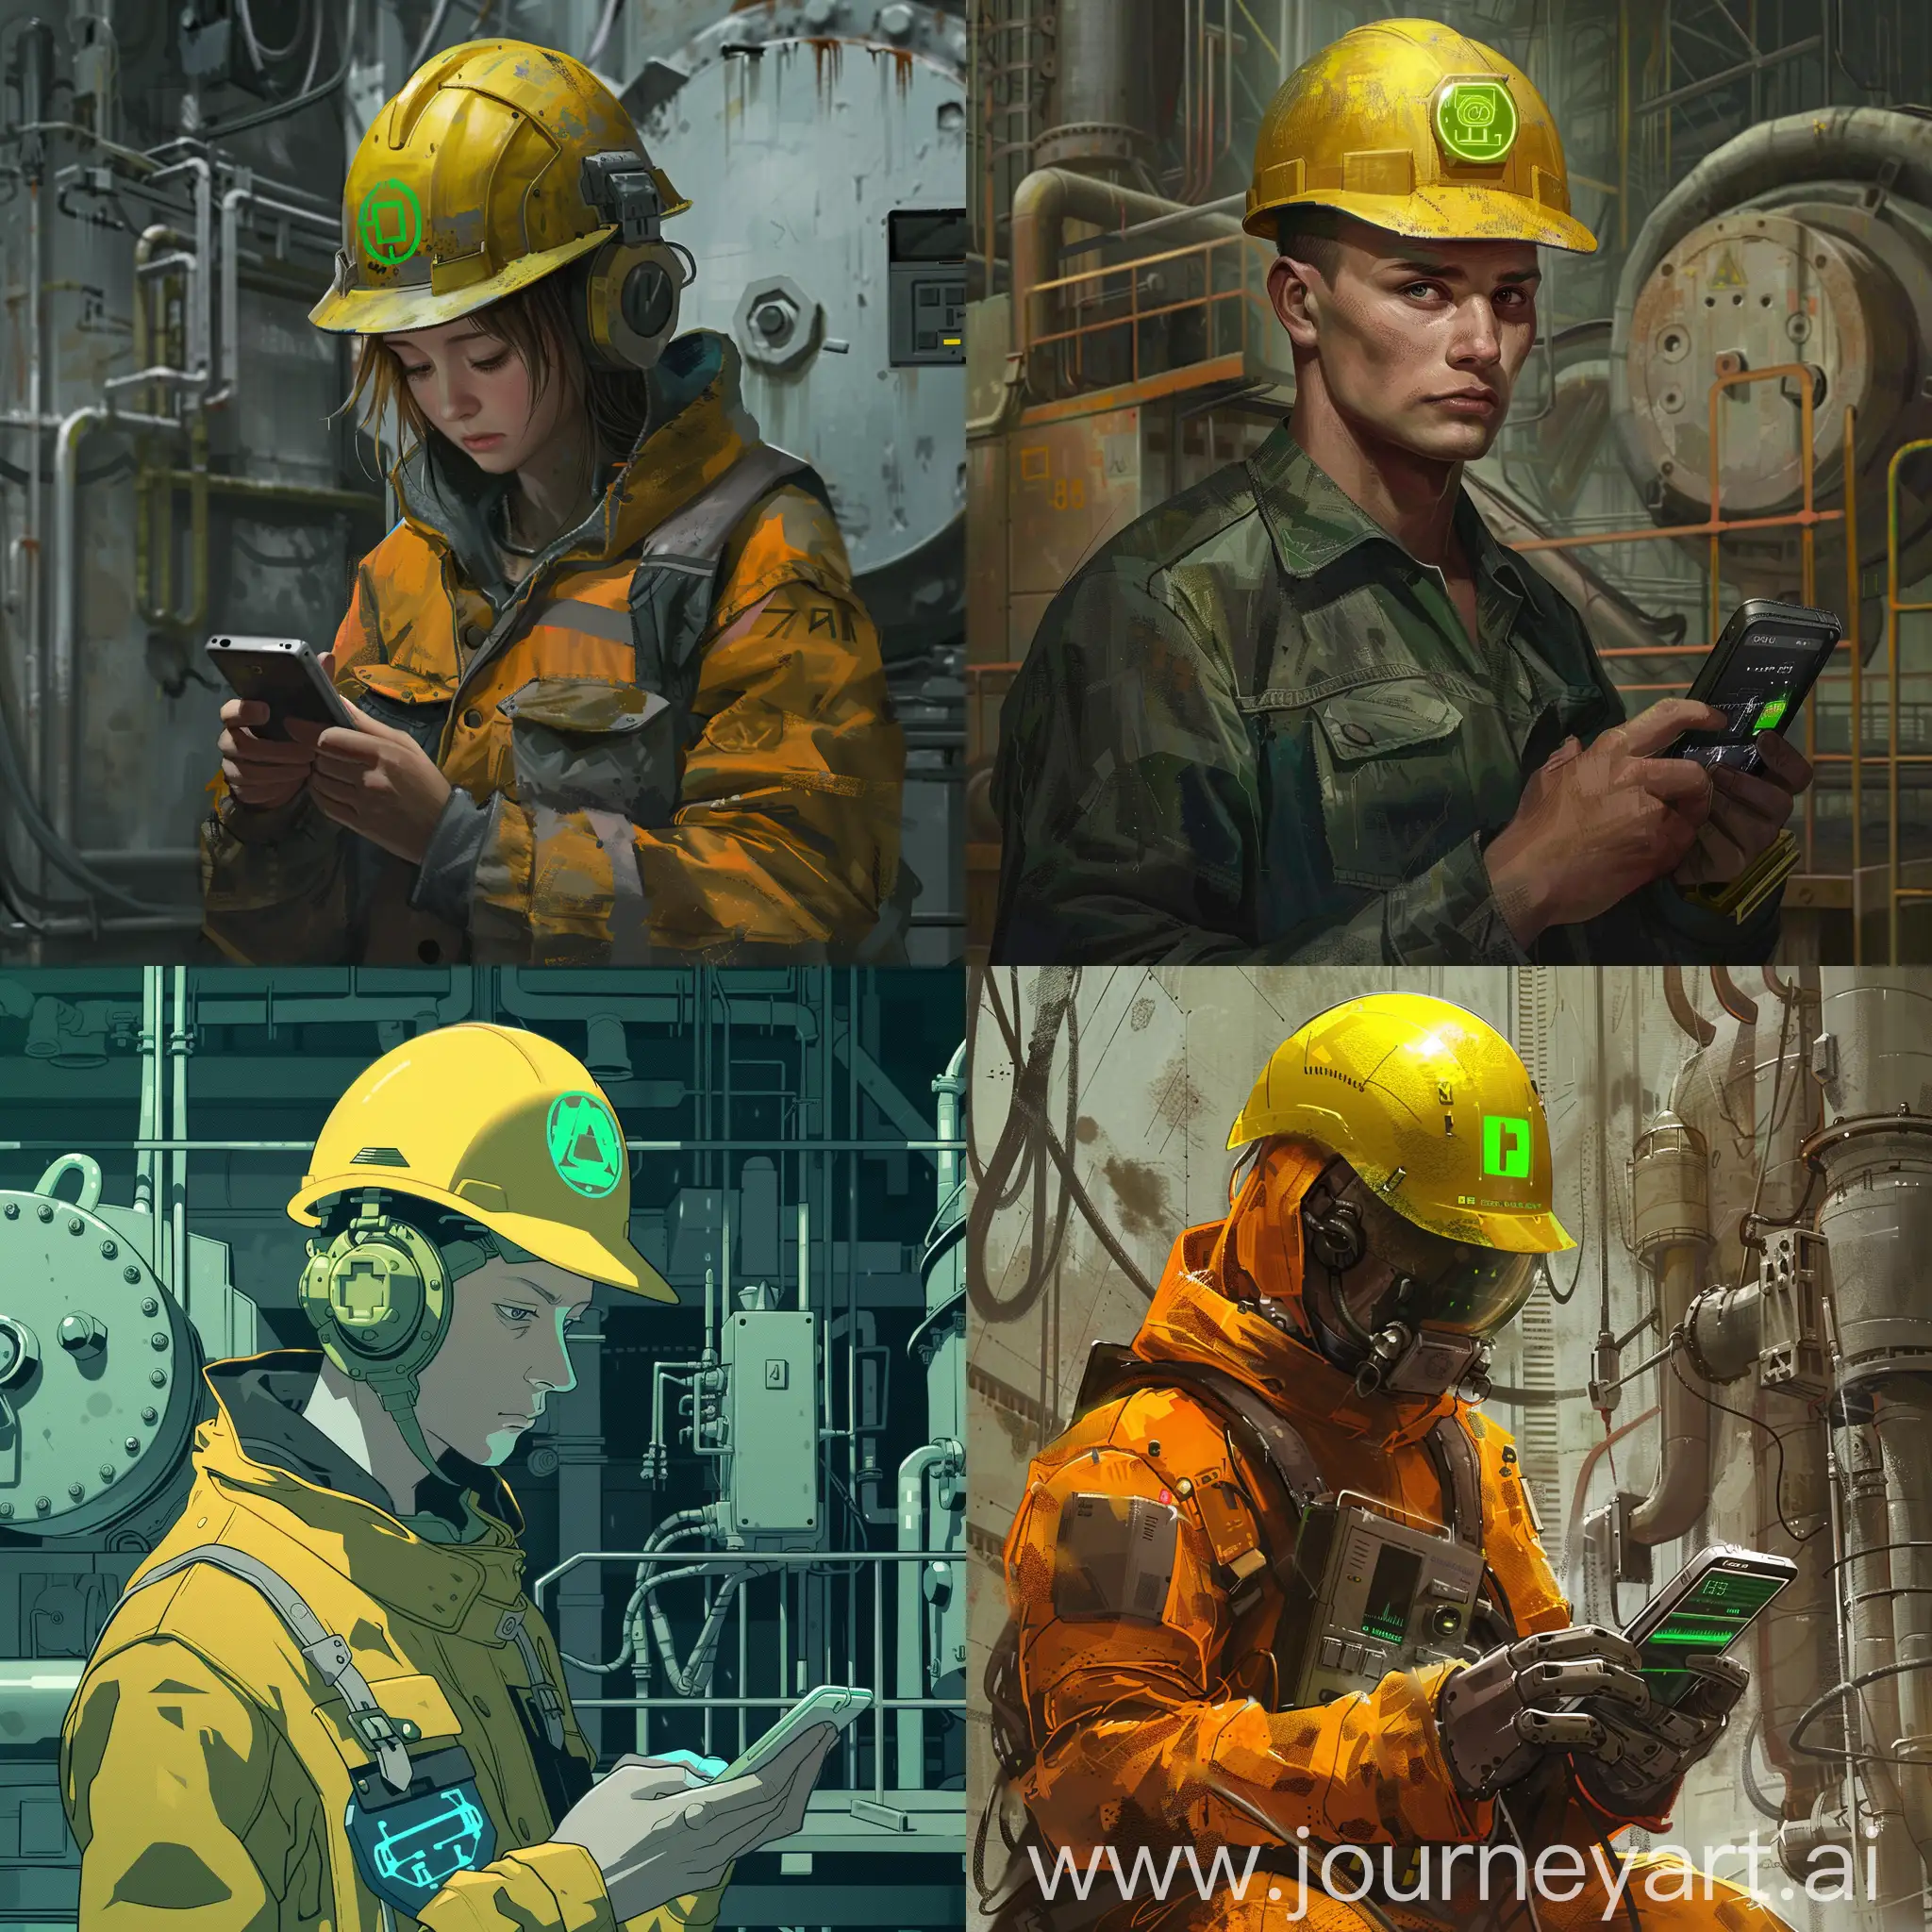 Young-Slavic-Nuclear-Power-Plant-Operator-in-Work-Clothes-with-Android-Symbol-Hard-Hat